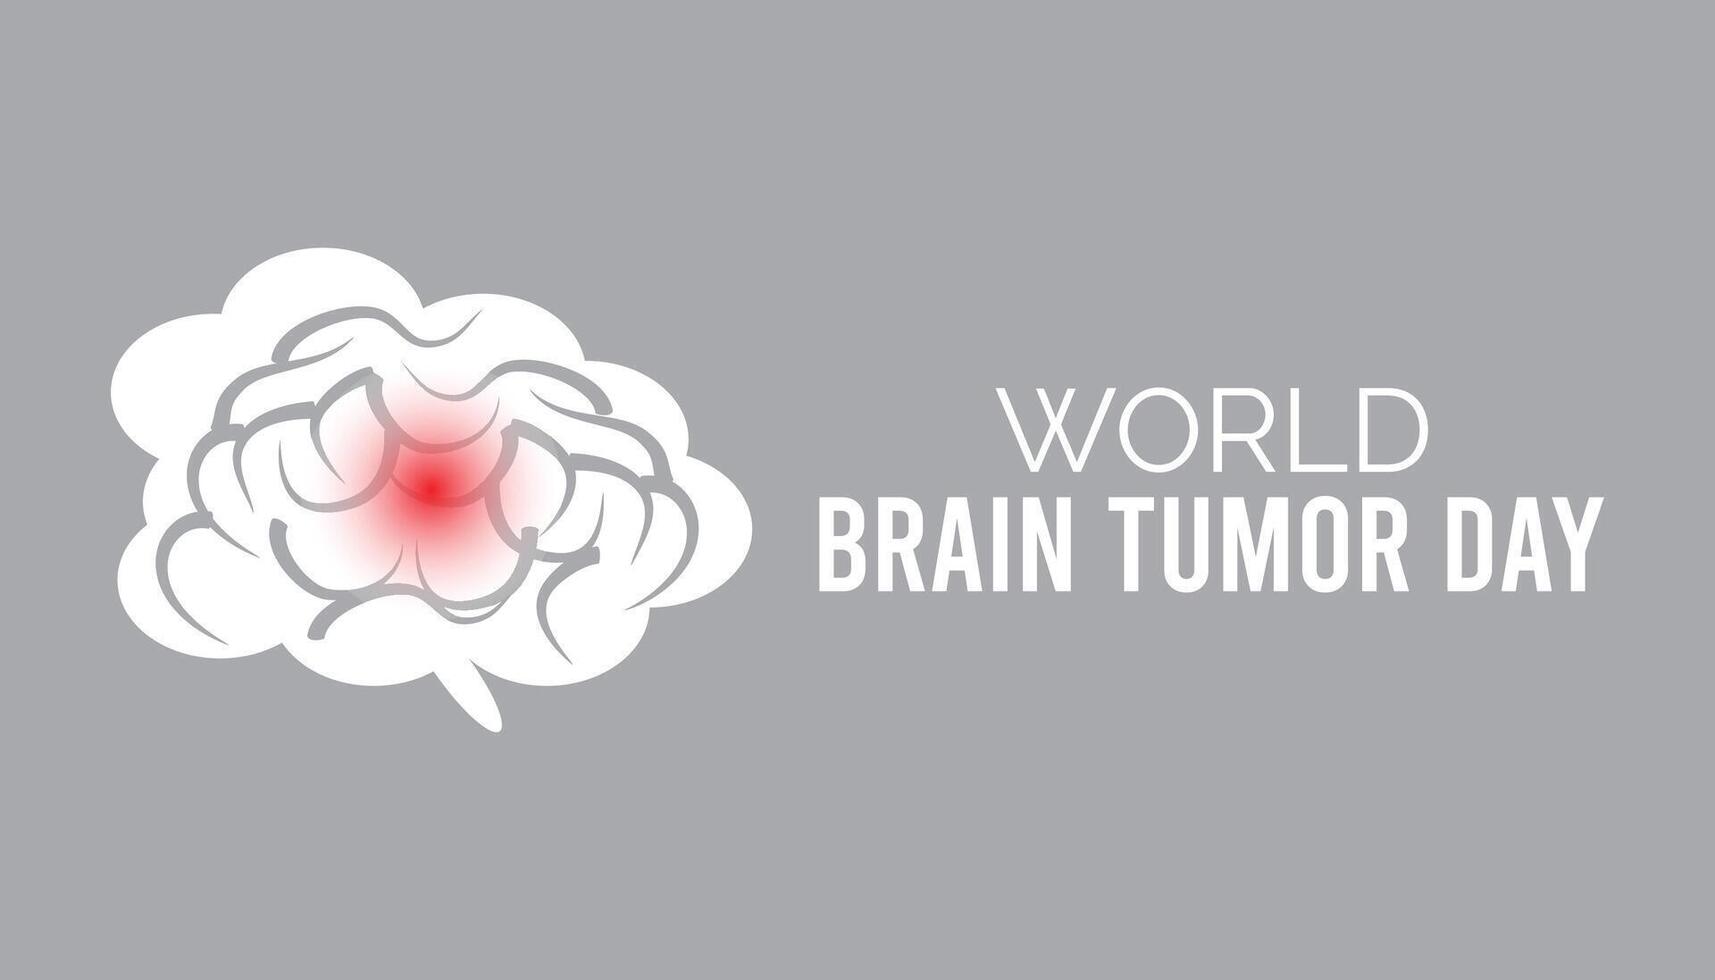 World Brain Tumor Day observed every year in June. Template for background, banner, card, poster with text inscription. vector